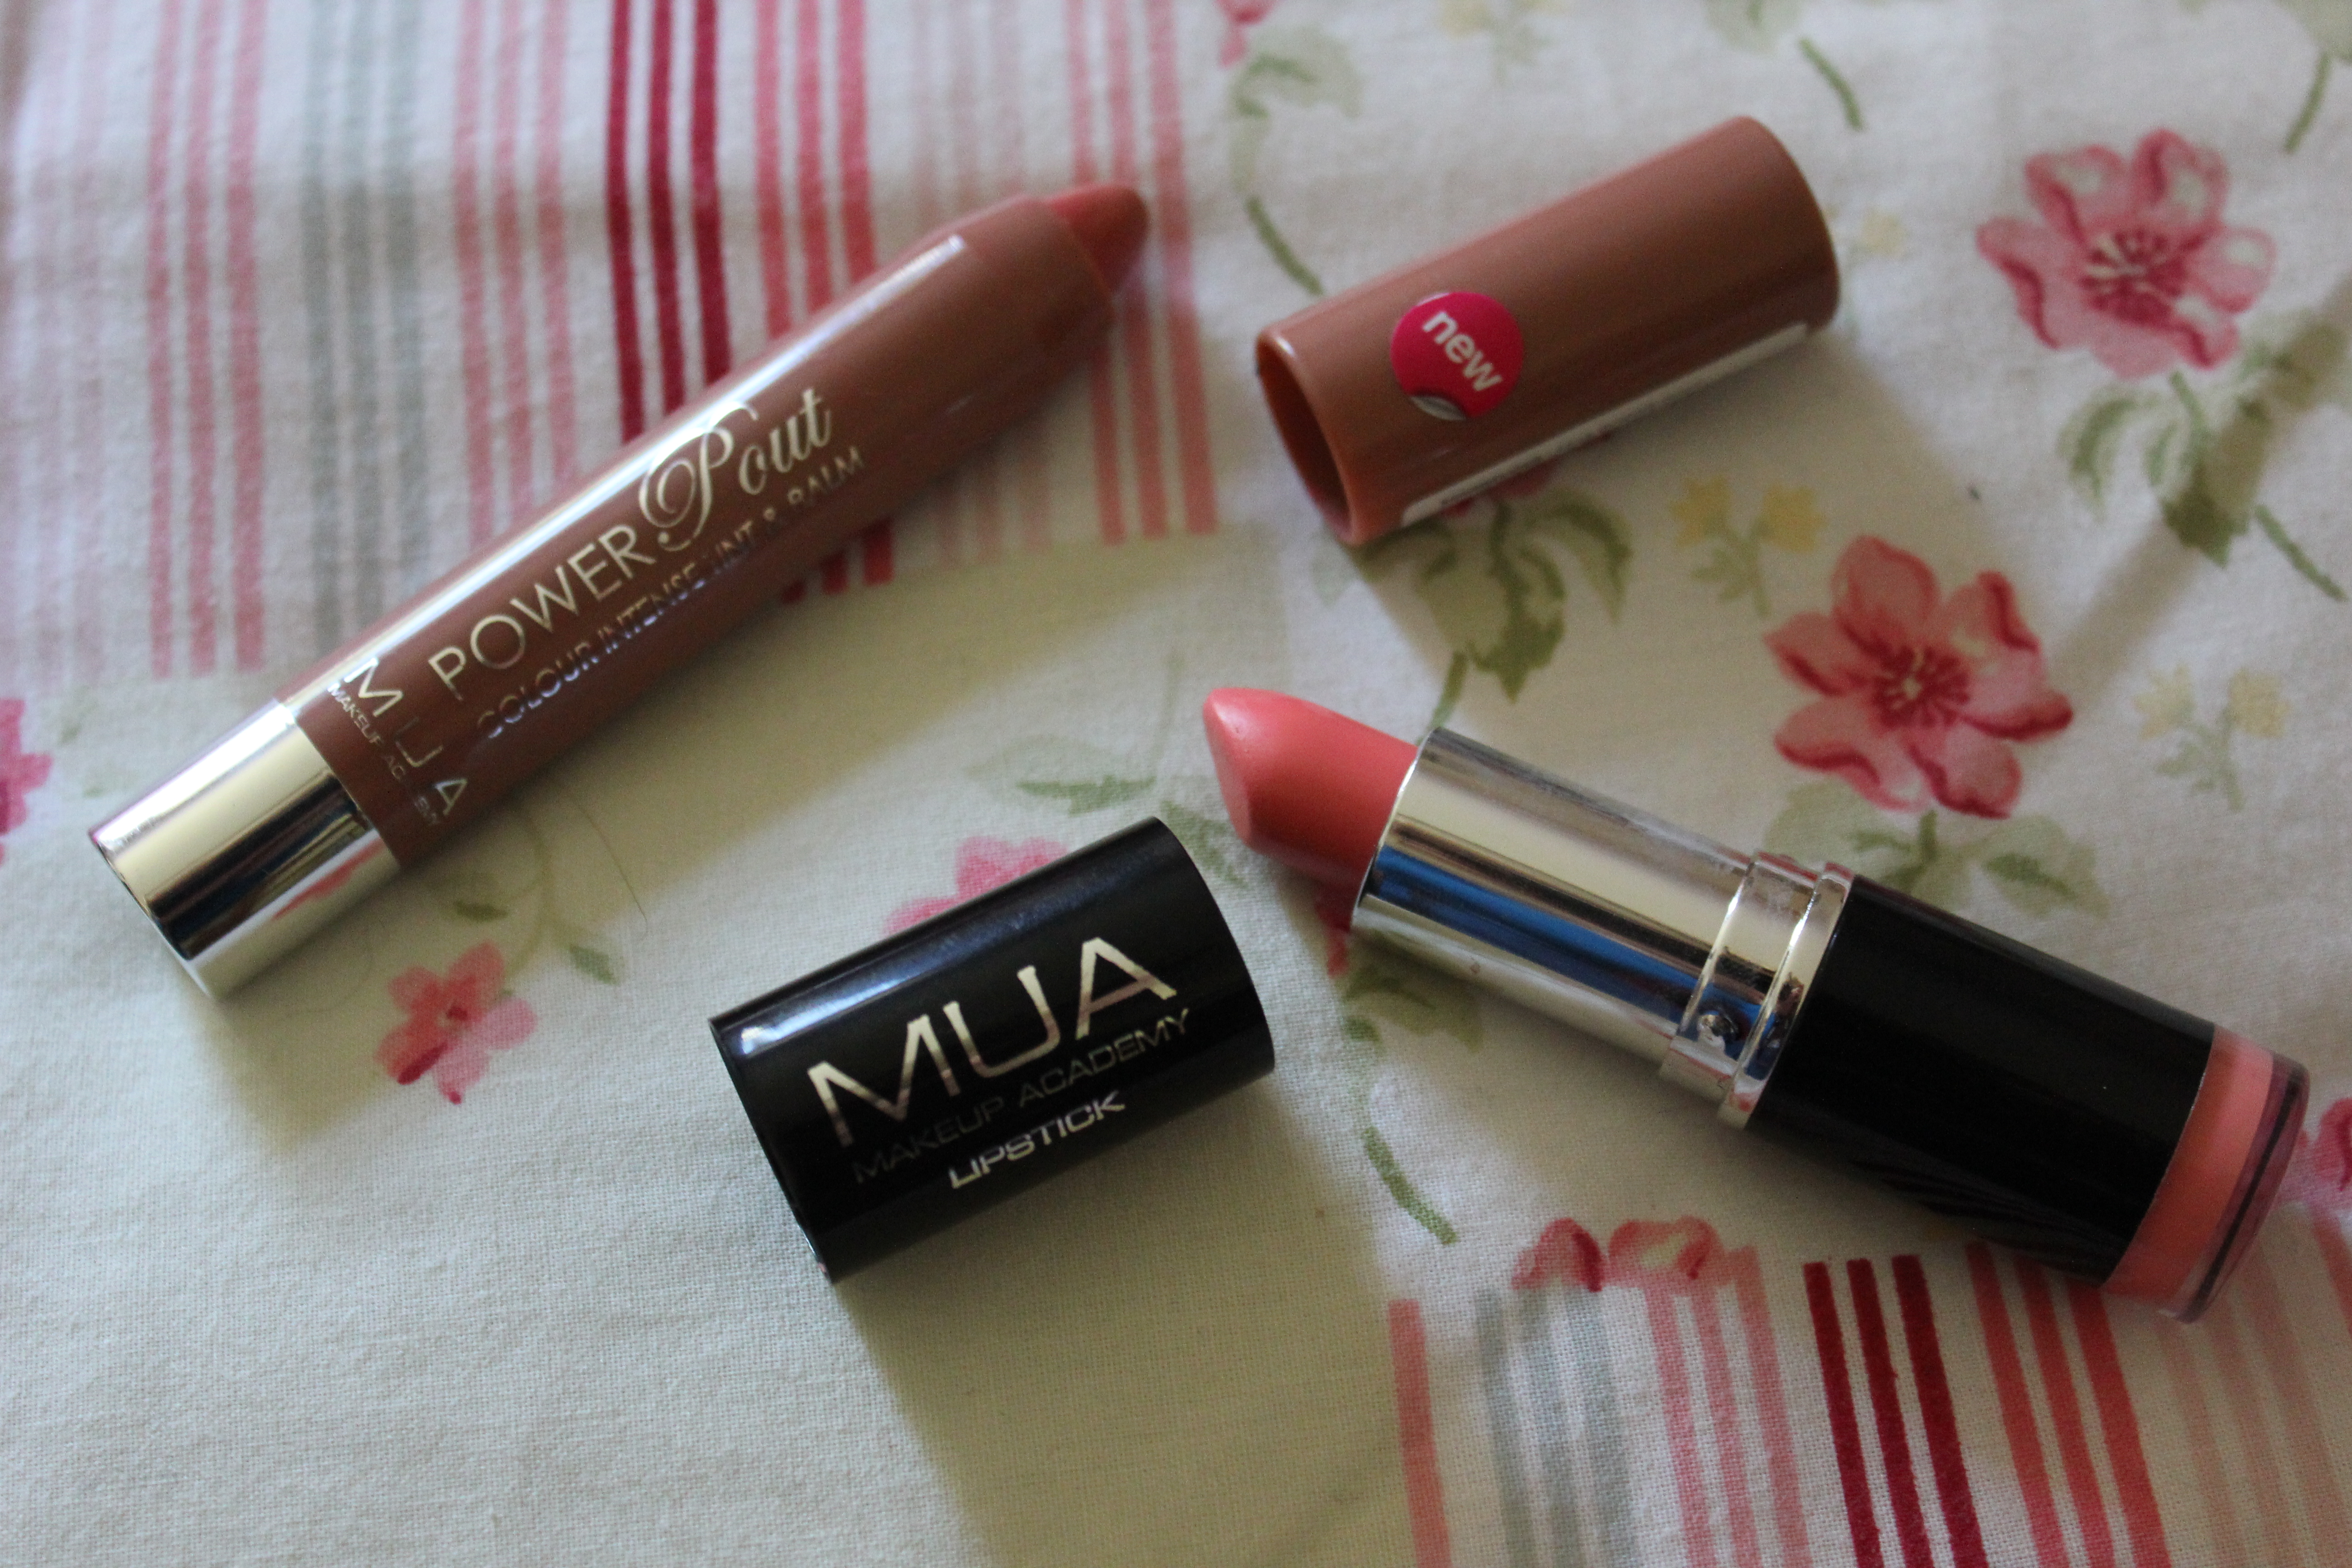 MUA lipstick and power pout tint balm in rendezvous